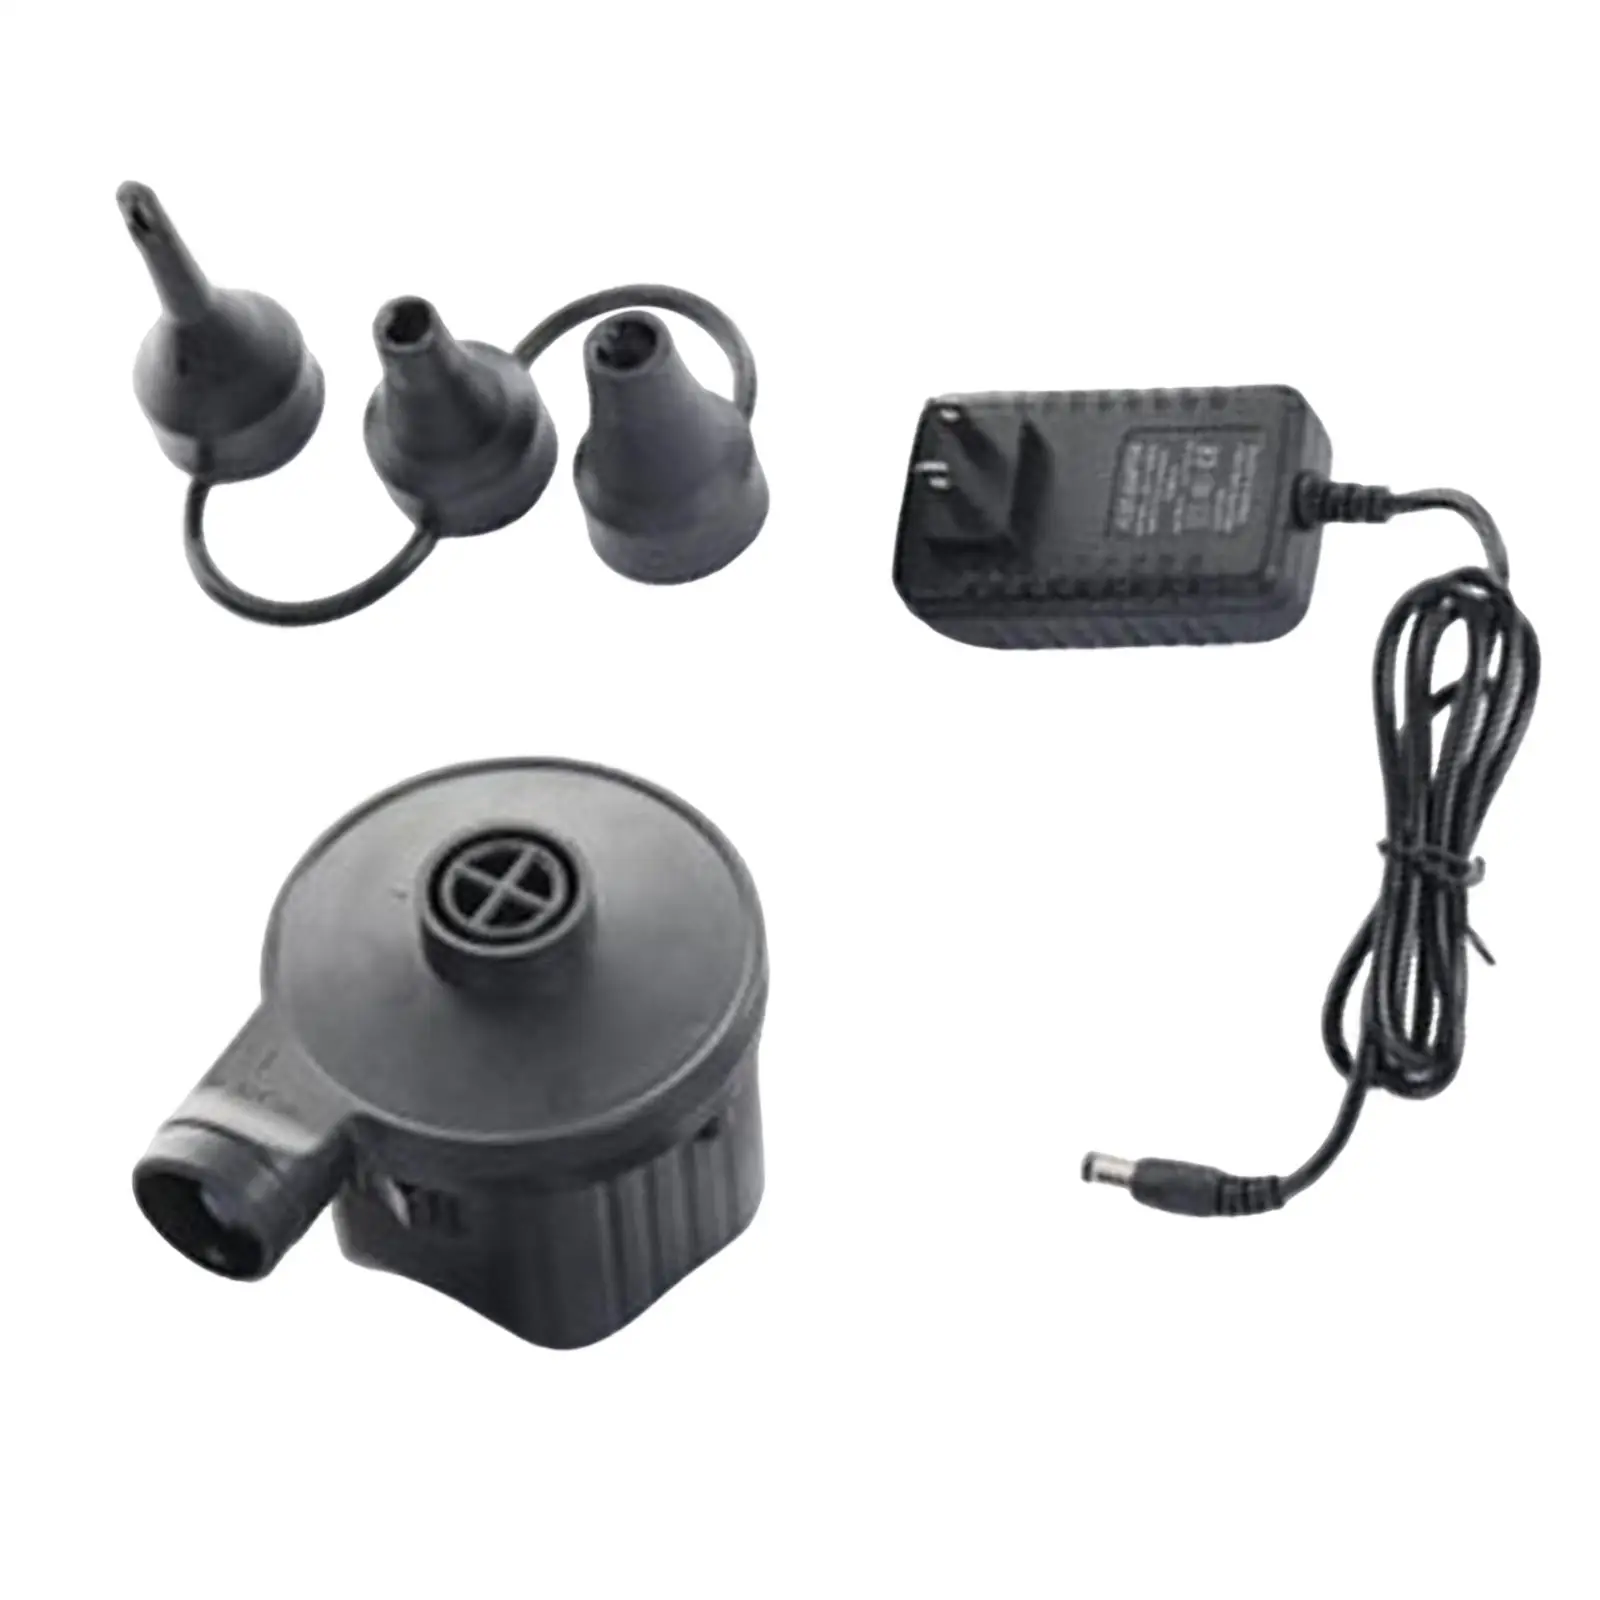 Electric Air Pump Quickly Fill Inflator/Deflator Pump for Inflatable Cushions Swimming Rings Boats